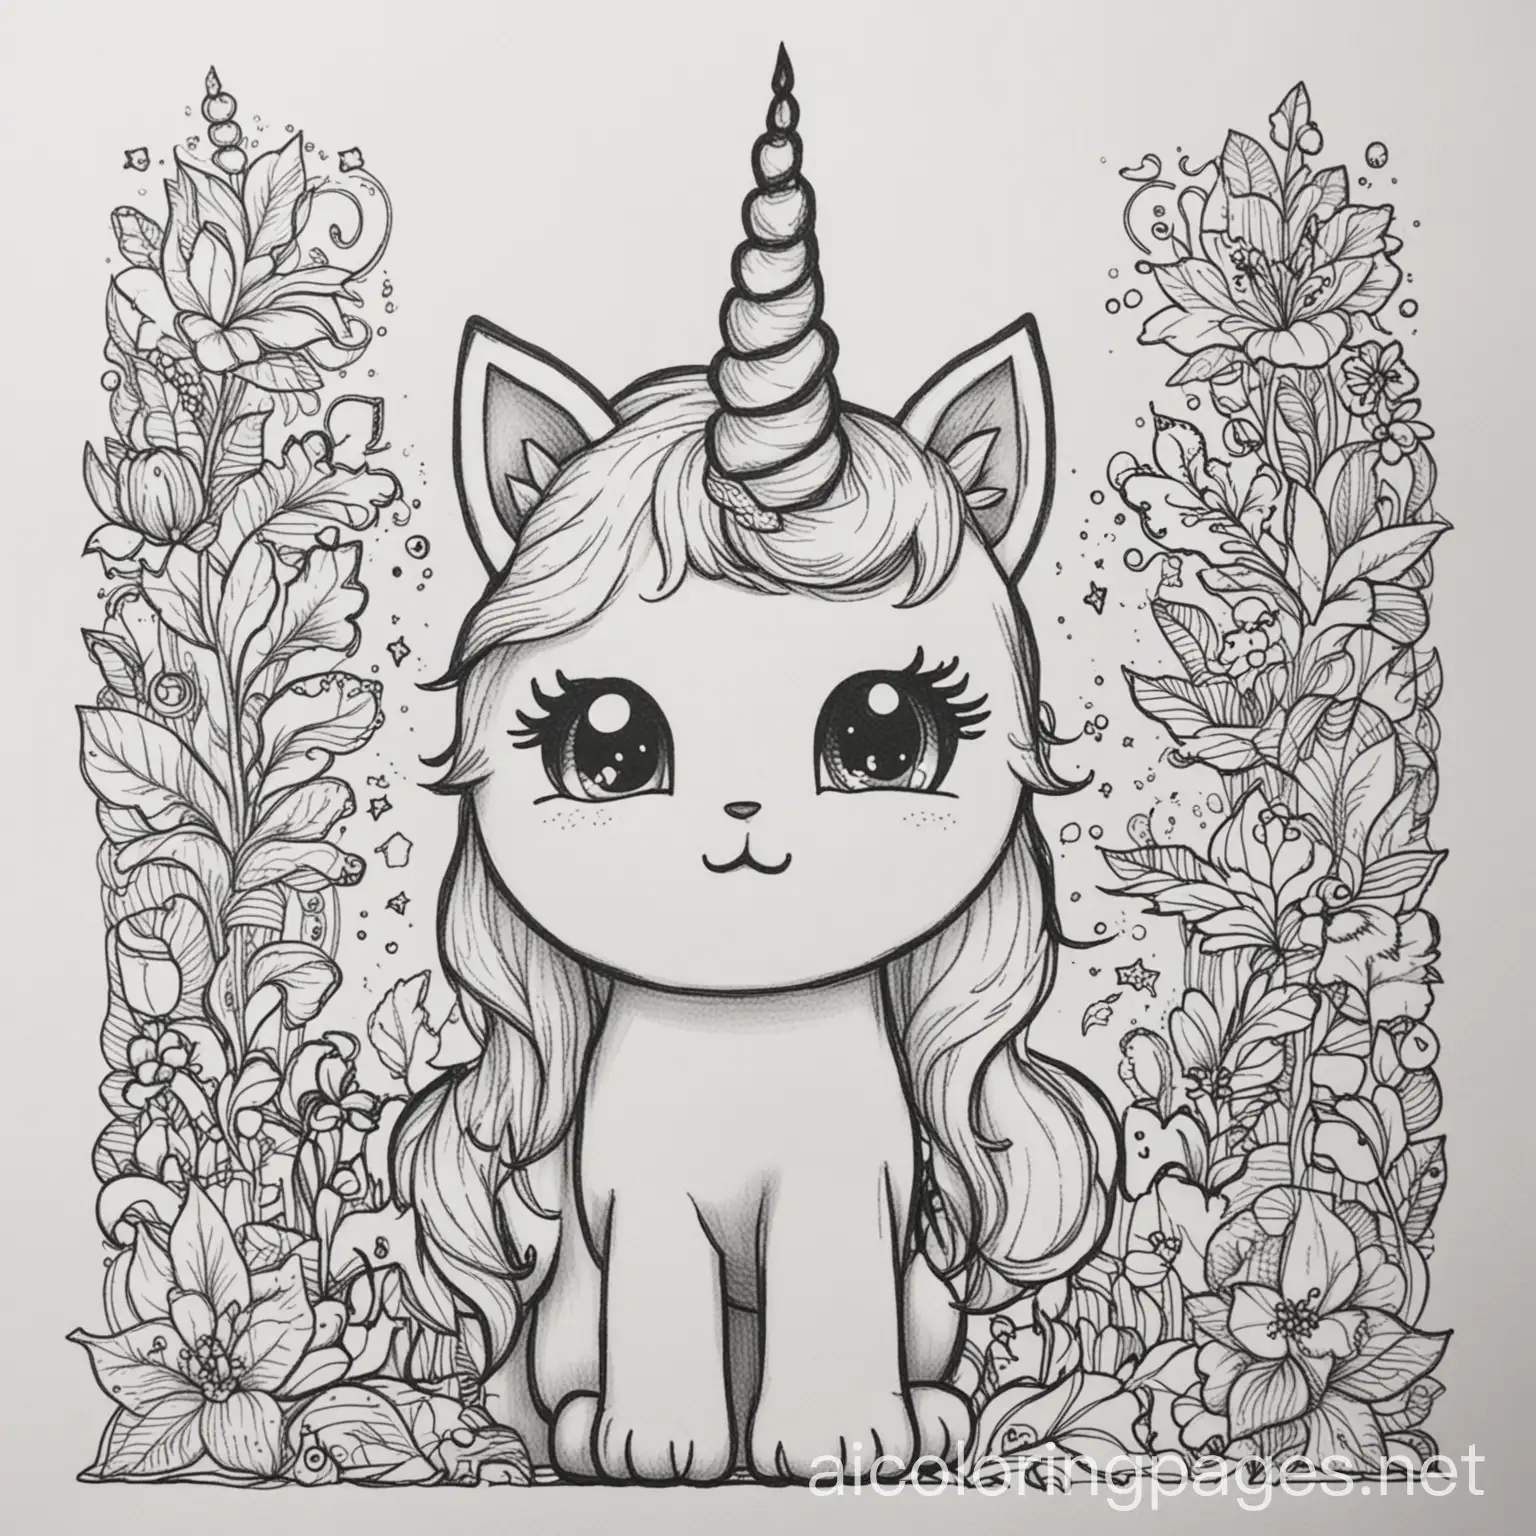 kitty unicorn  5th birthday party

, Coloring Page, black and white, line art, white background, Simplicity, Ample White Space. The background of the coloring page is plain white to make it easy for young children to color within the lines. The outlines of all the subjects are easy to distinguish, making it simple for kids to color without too much difficulty